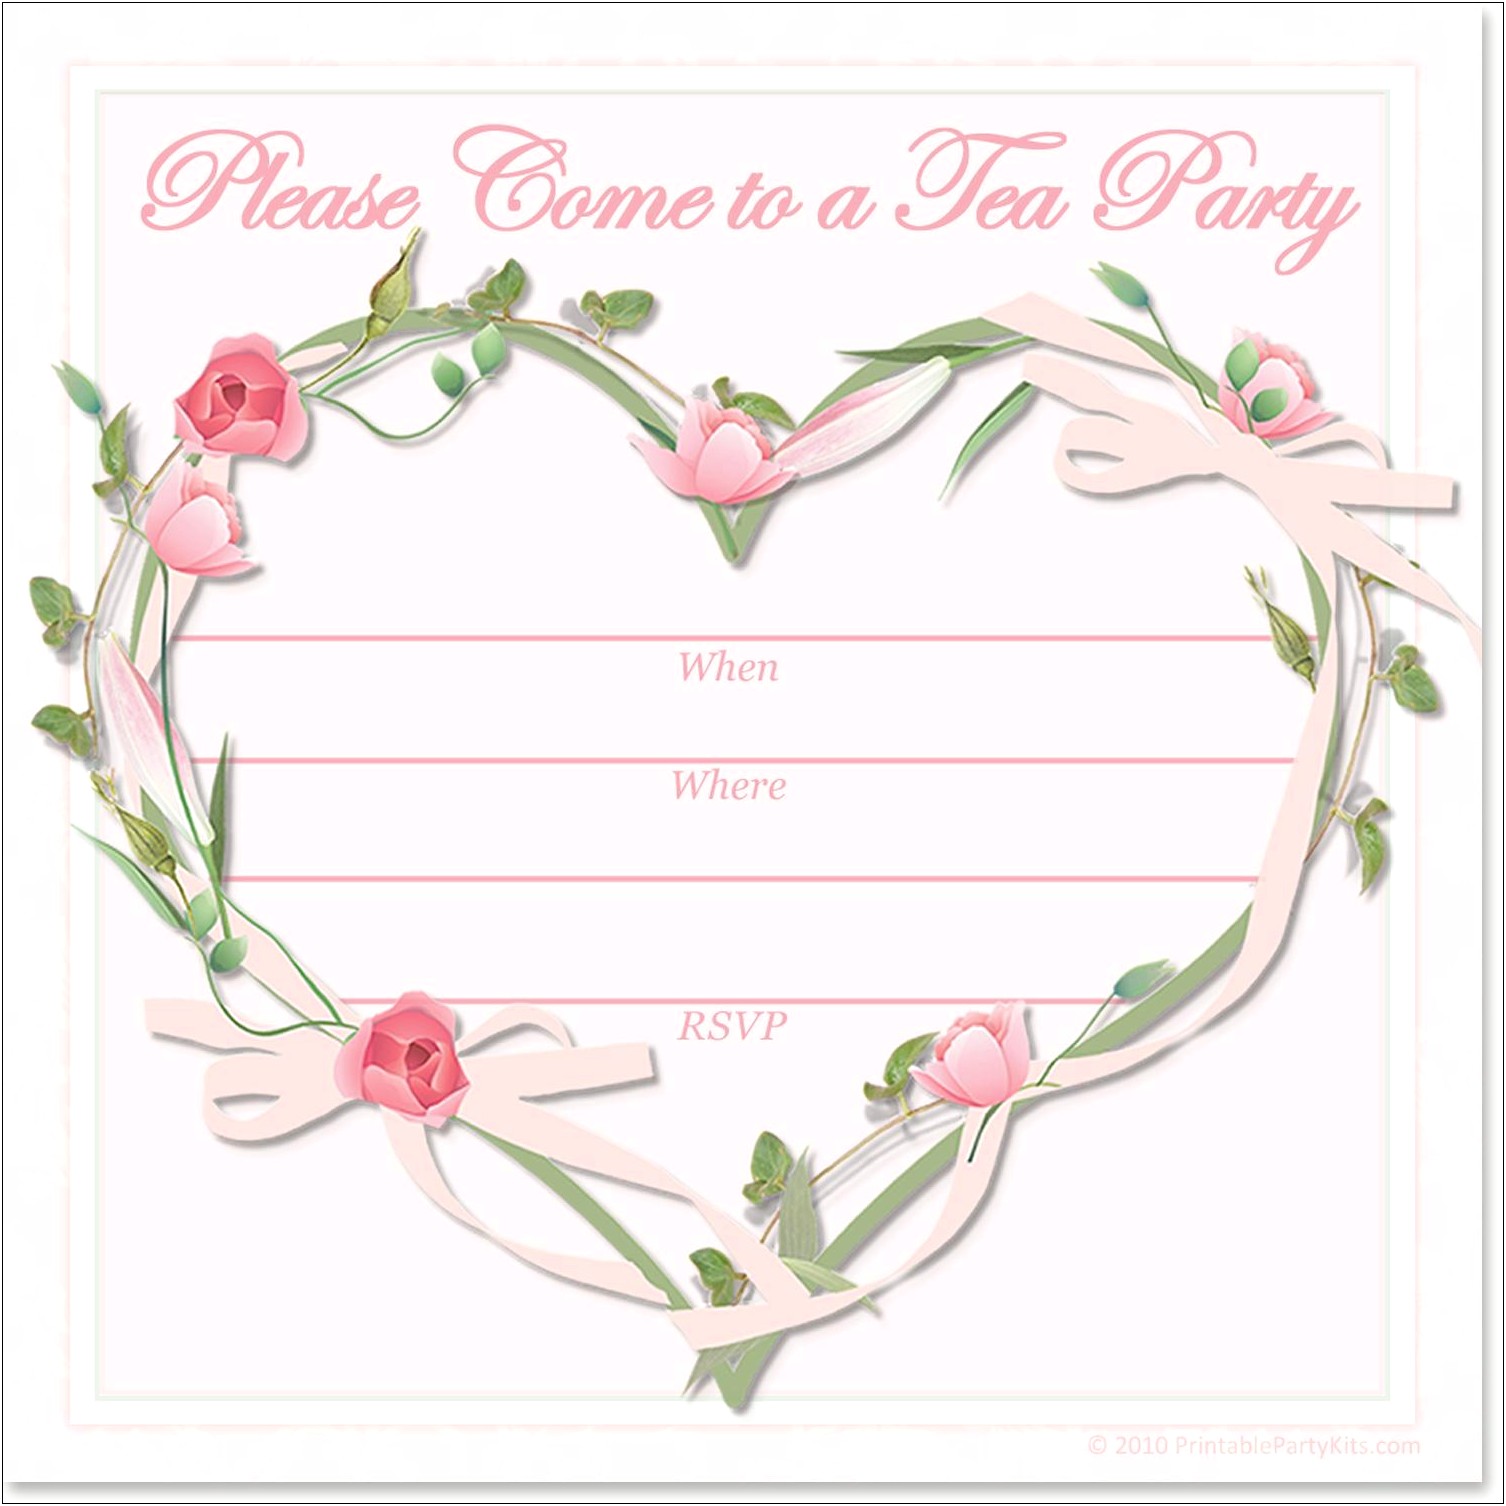 Free Afternoon Tea Party Invitation Template